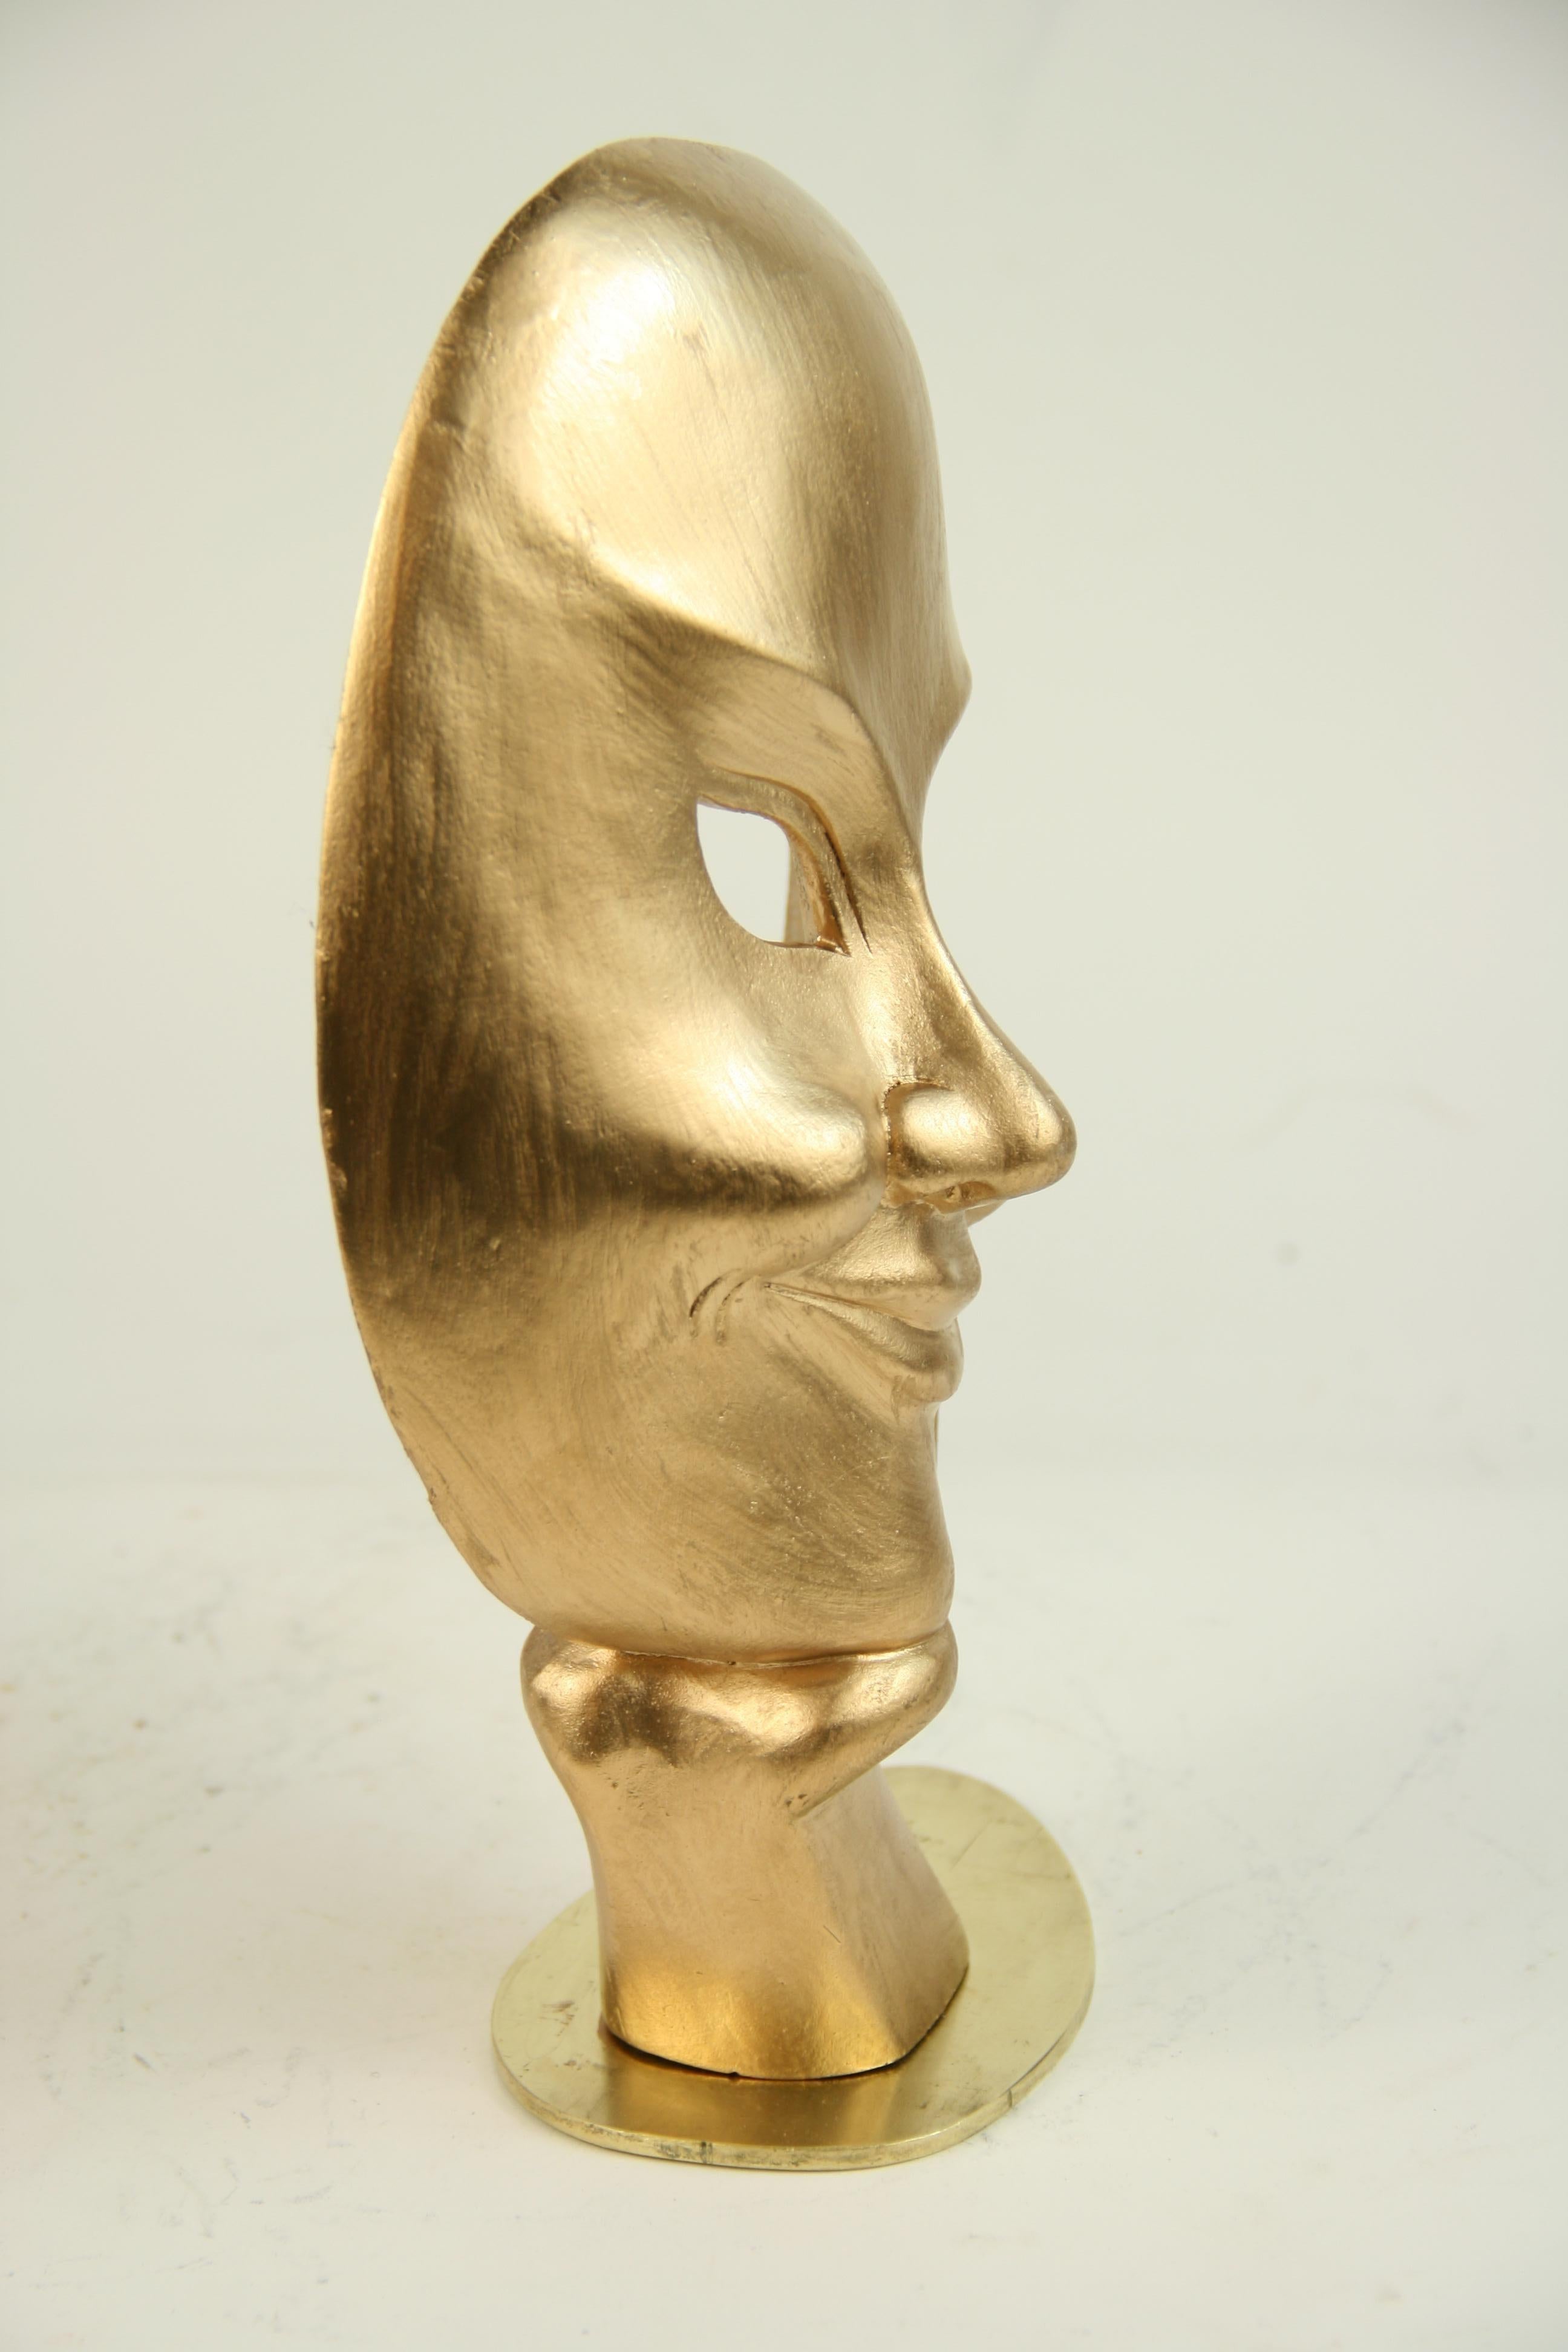 Carved Wood Facial Sculpture on Brass Base 3